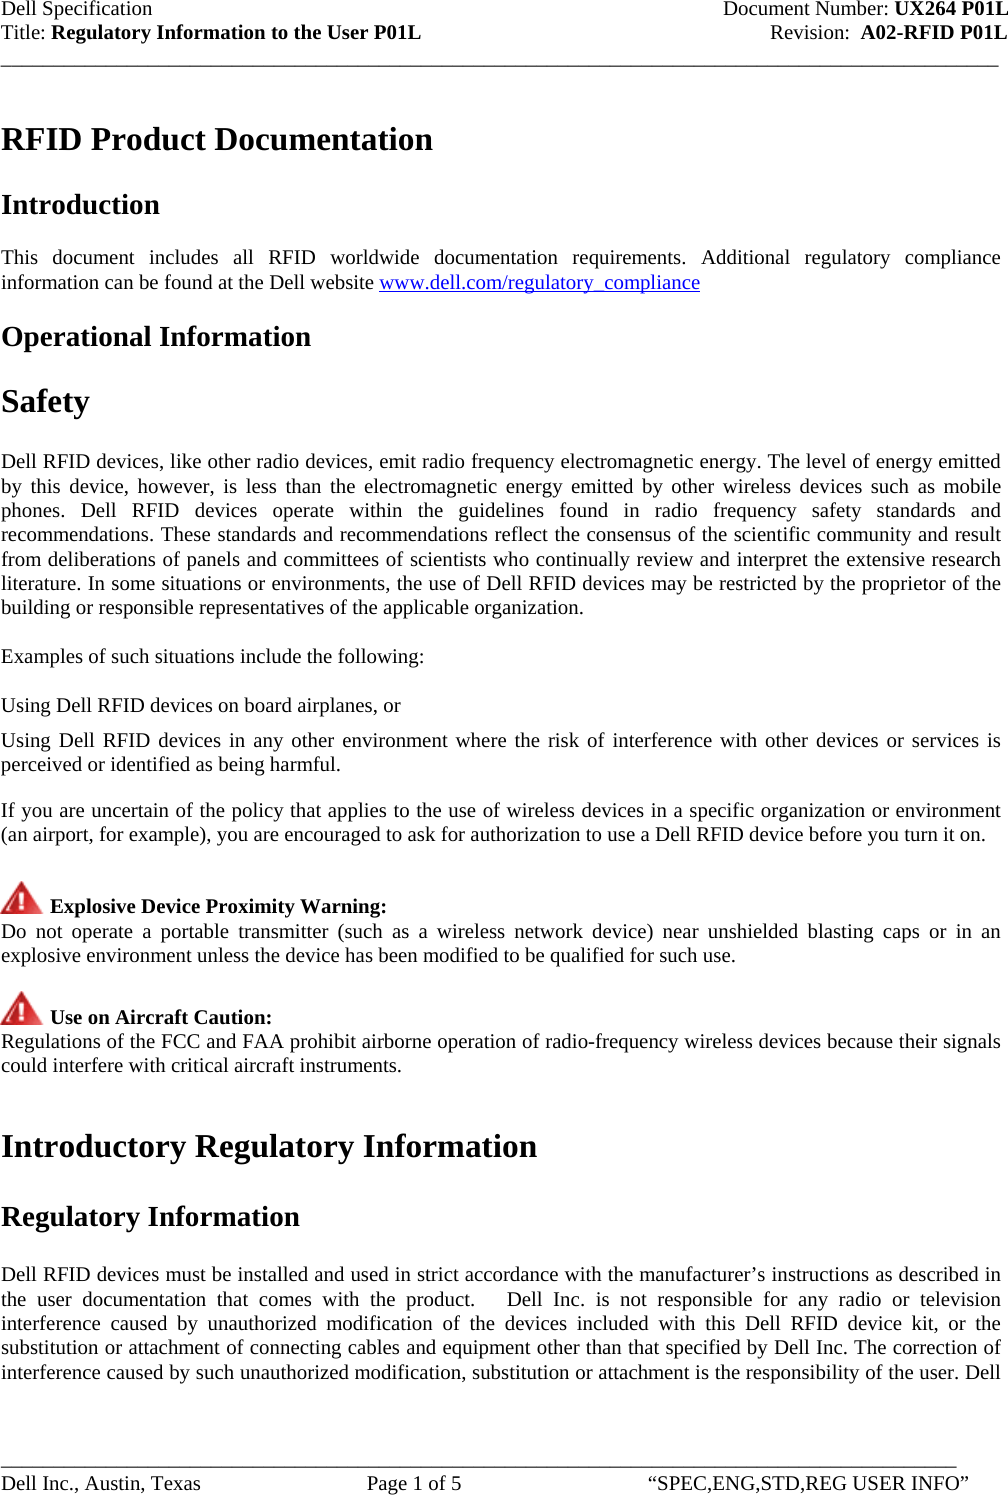 Dell Specification    Document Number: UX264 P01L Title: Regulatory Information to the User P01L             Revision:  A02-RFID P01L _______________________________________________________________________________________________ RFID Product Documentation    Introduction  This document includes all RFID worldwide documentation requirements. Additional regulatory compliance information can be found at the Dell website www.dell.com/regulatory_compliance   Operational Information  Safety  Dell RFID devices, like other radio devices, emit radio frequency electromagnetic energy. The level of energy emitted by this device, however, is less than the electromagnetic energy emitted by other wireless devices such as mobile phones. Dell RFID devices operate within the guidelines found in radio frequency safety standards and recommendations. These standards and recommendations reflect the consensus of the scientific community and result from deliberations of panels and committees of scientists who continually review and interpret the extensive research literature. In some situations or environments, the use of Dell RFID devices may be restricted by the proprietor of the building or responsible representatives of the applicable organization.  Examples of such situations include the following:  Using Dell RFID devices on board airplanes, or T Using Dell RFID devices in any other environment where the risk of interference with other devices or services is perceived or identified as being harmful.  If you are uncertain of the policy that applies to the use of wireless devices in a specific organization or environment (an airport, for example), you are encouraged to ask for authorization to use a Dell RFID device before you turn it on.   Explosive Device Proximity Warning:  Do not operate a portable transmitter (such as a wireless network device) near unshielded blasting caps or in an explosive environment unless the device has been modified to be qualified for such use.   Use on Aircraft Caution:  Regulations of the FCC and FAA prohibit airborne operation of radio-frequency wireless devices because their signals could interfere with critical aircraft instruments.   Introductory Regulatory Information  Regulatory Information  Dell RFID devices must be installed and used in strict accordance with the manufacturer’s instructions as described in the user documentation that comes with the product.   Dell Inc. is not responsible for any radio or television interference caused by unauthorized modification of the devices included with this Dell RFID device kit, or the substitution or attachment of connecting cables and equipment other than that specified by Dell Inc. The correction of interference caused by such unauthorized modification, substitution or attachment is the responsibility of the user. Dell ___________________________________________________________________________________________ Dell Inc., Austin, Texas  Page 1 of 5  “SPEC,ENG,STD,REG USER INFO” 